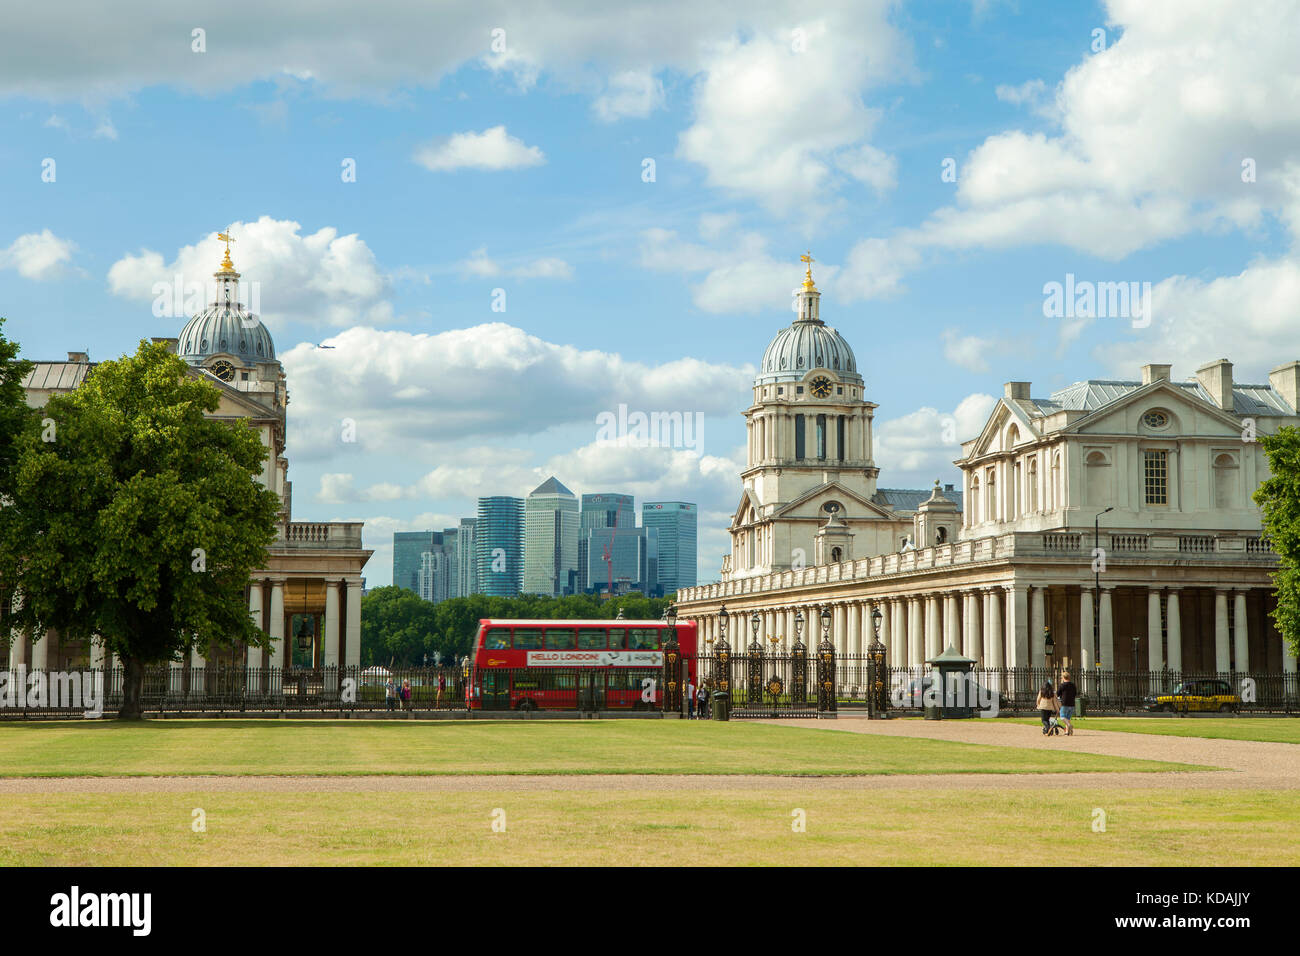 Greenwich naval college with red london bus. View from the park of Old London and new London Stock Photo